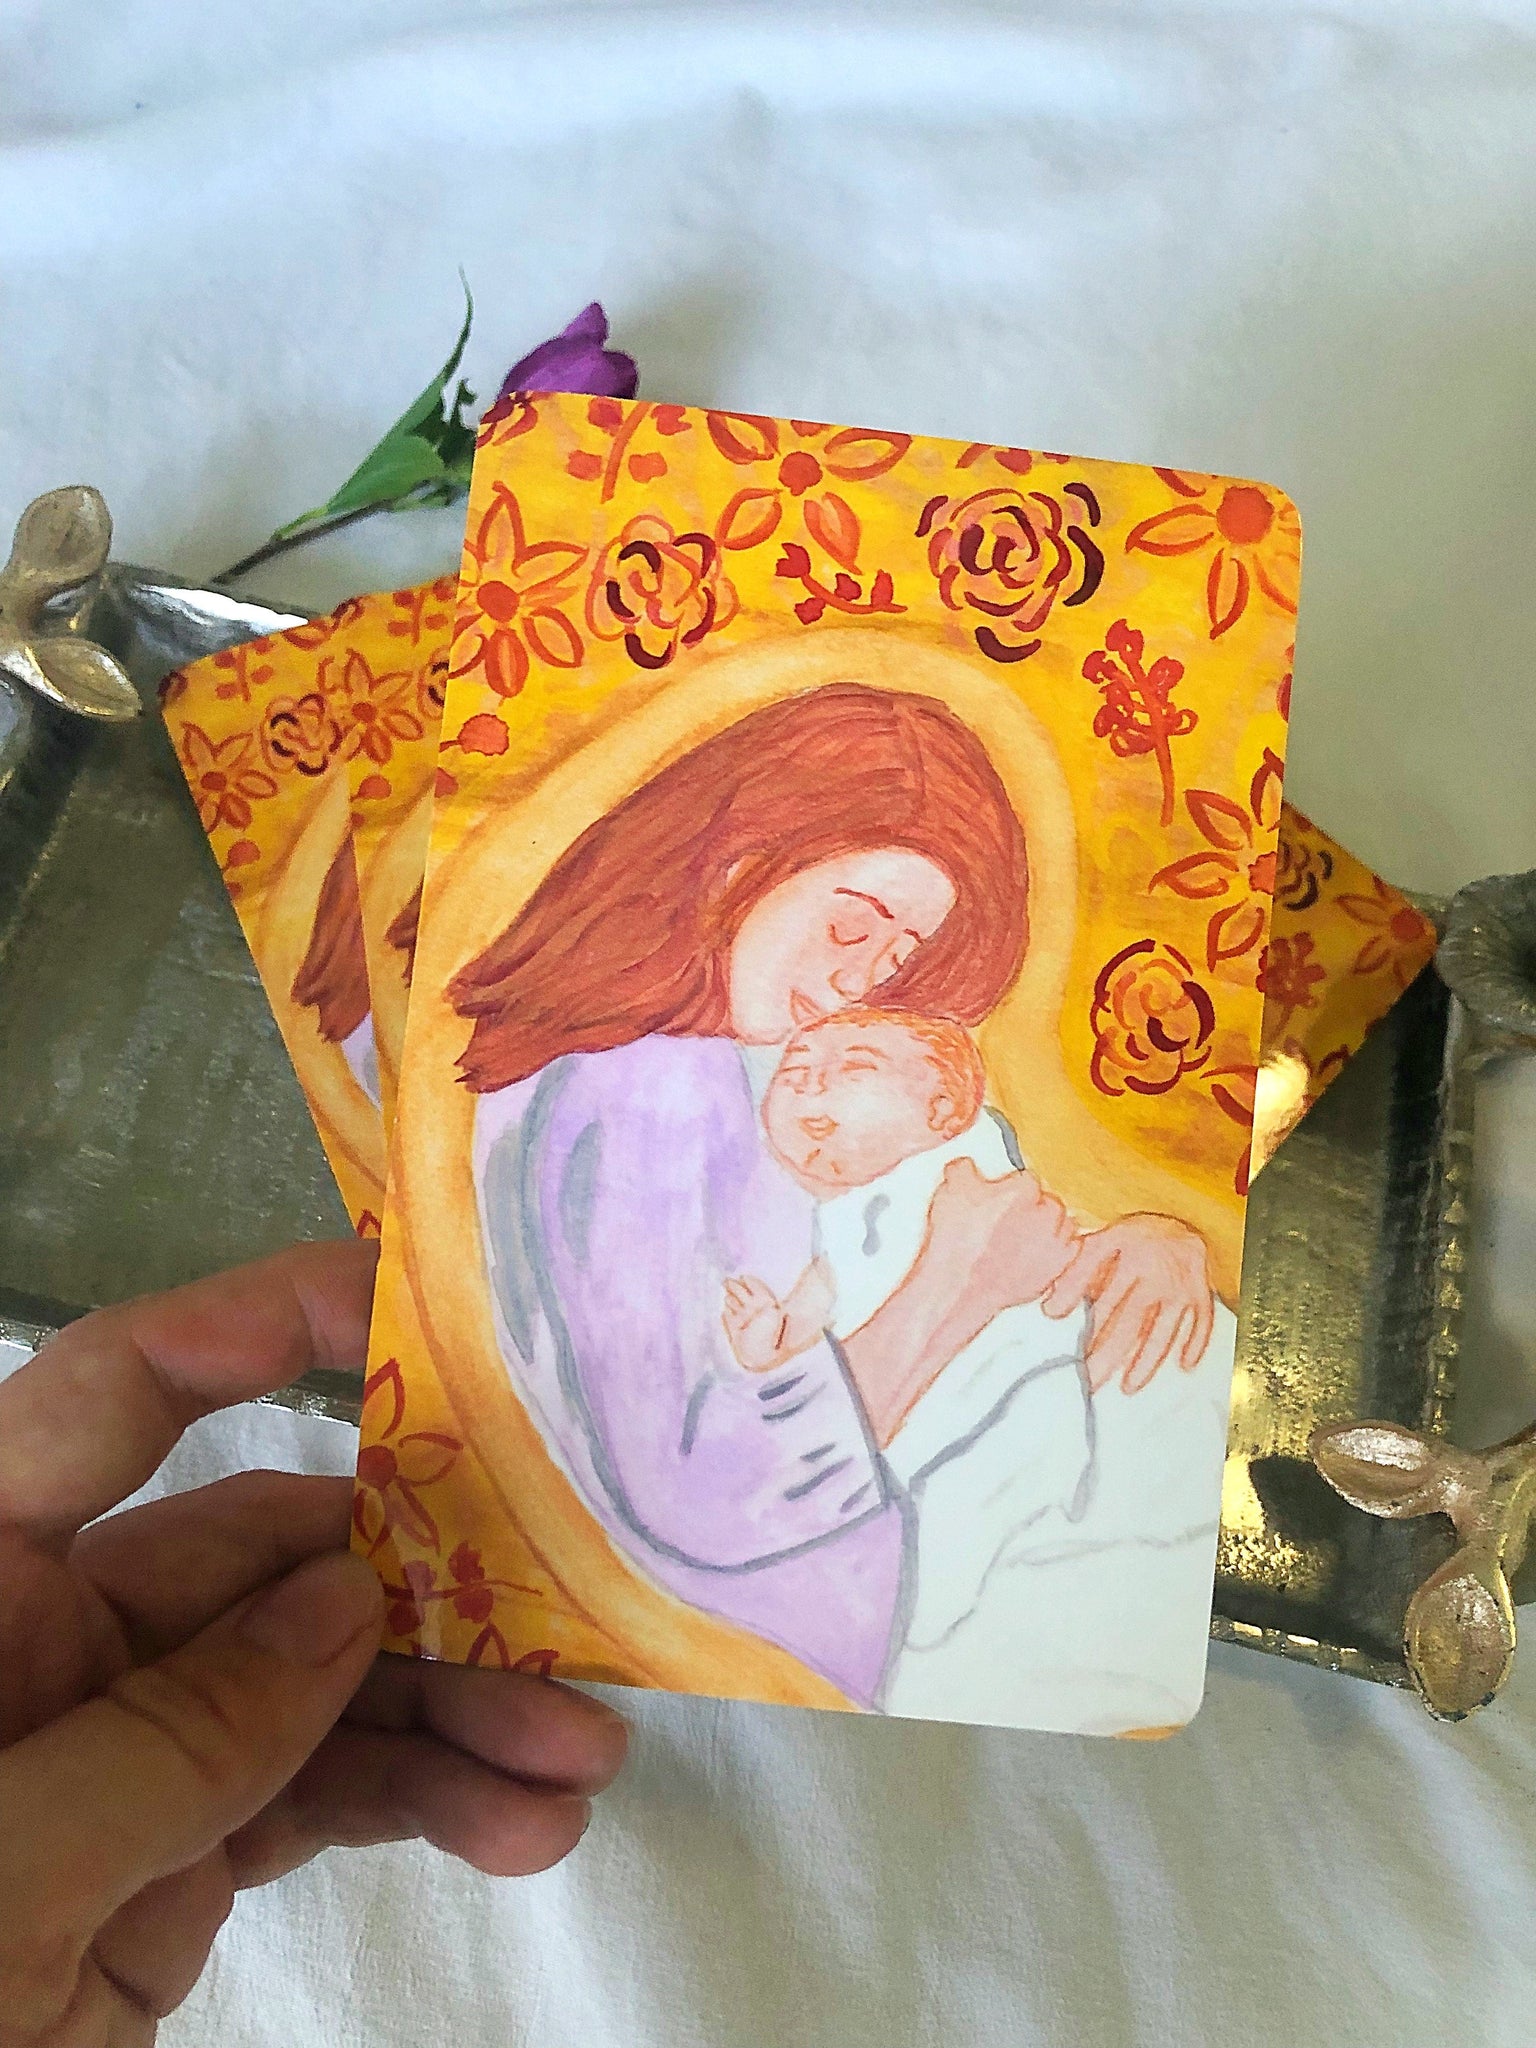 Pack of Prayer Cards Bundle - Mother's Prayer - Support for Mothers